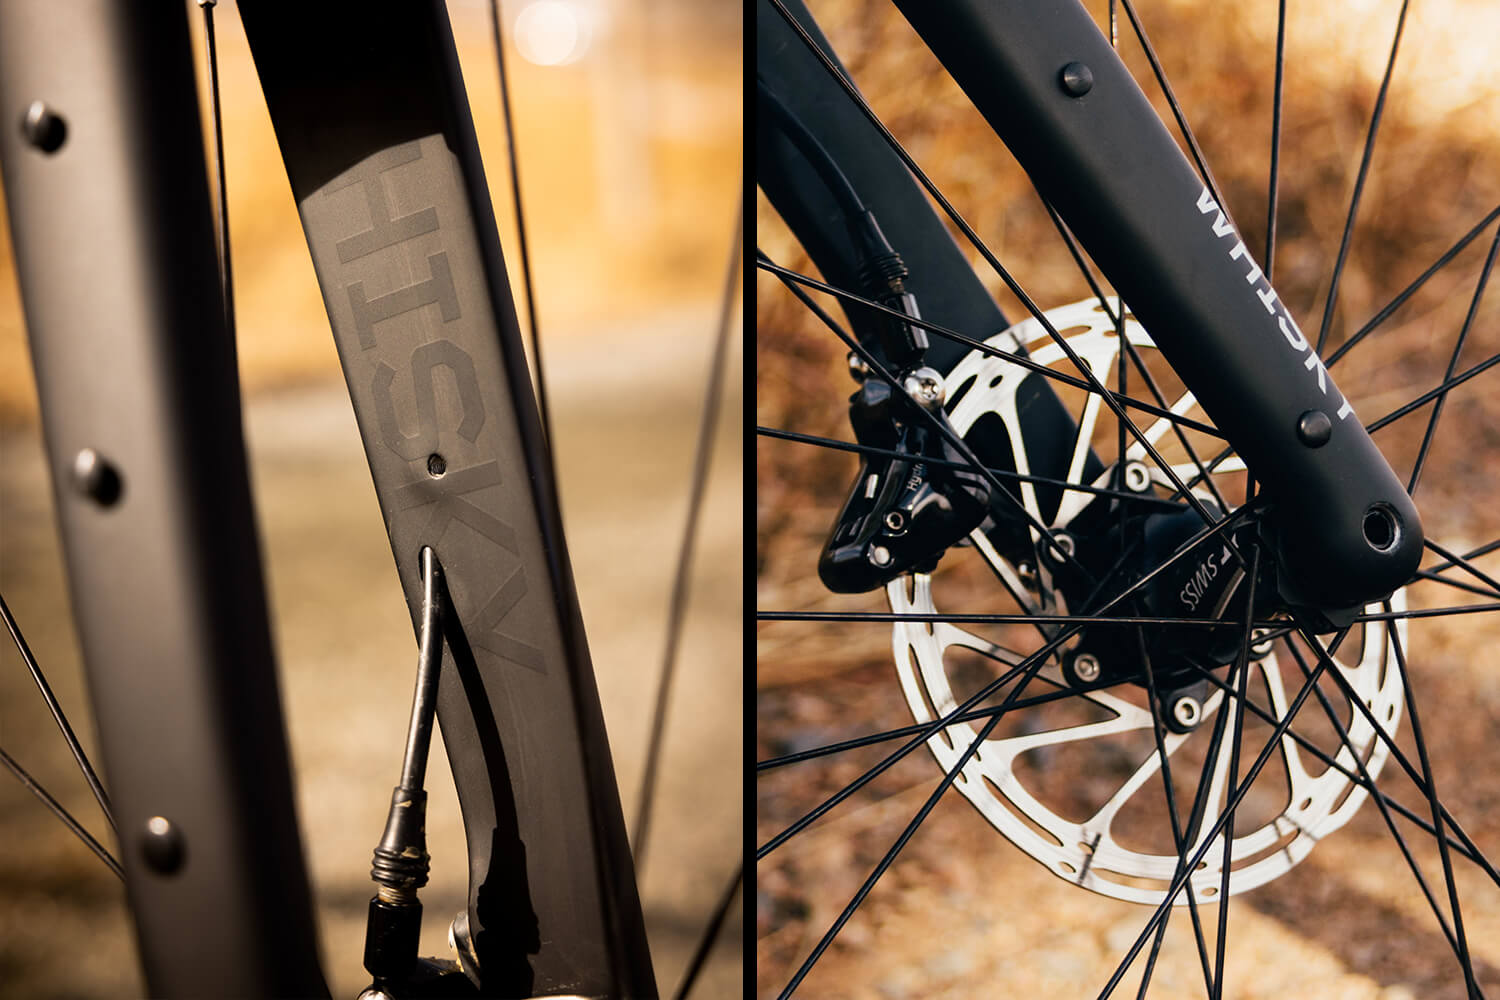 Side by side closeups of the CXLR fork. The left shows the internal routing, the right shows a brake caliper mounted.